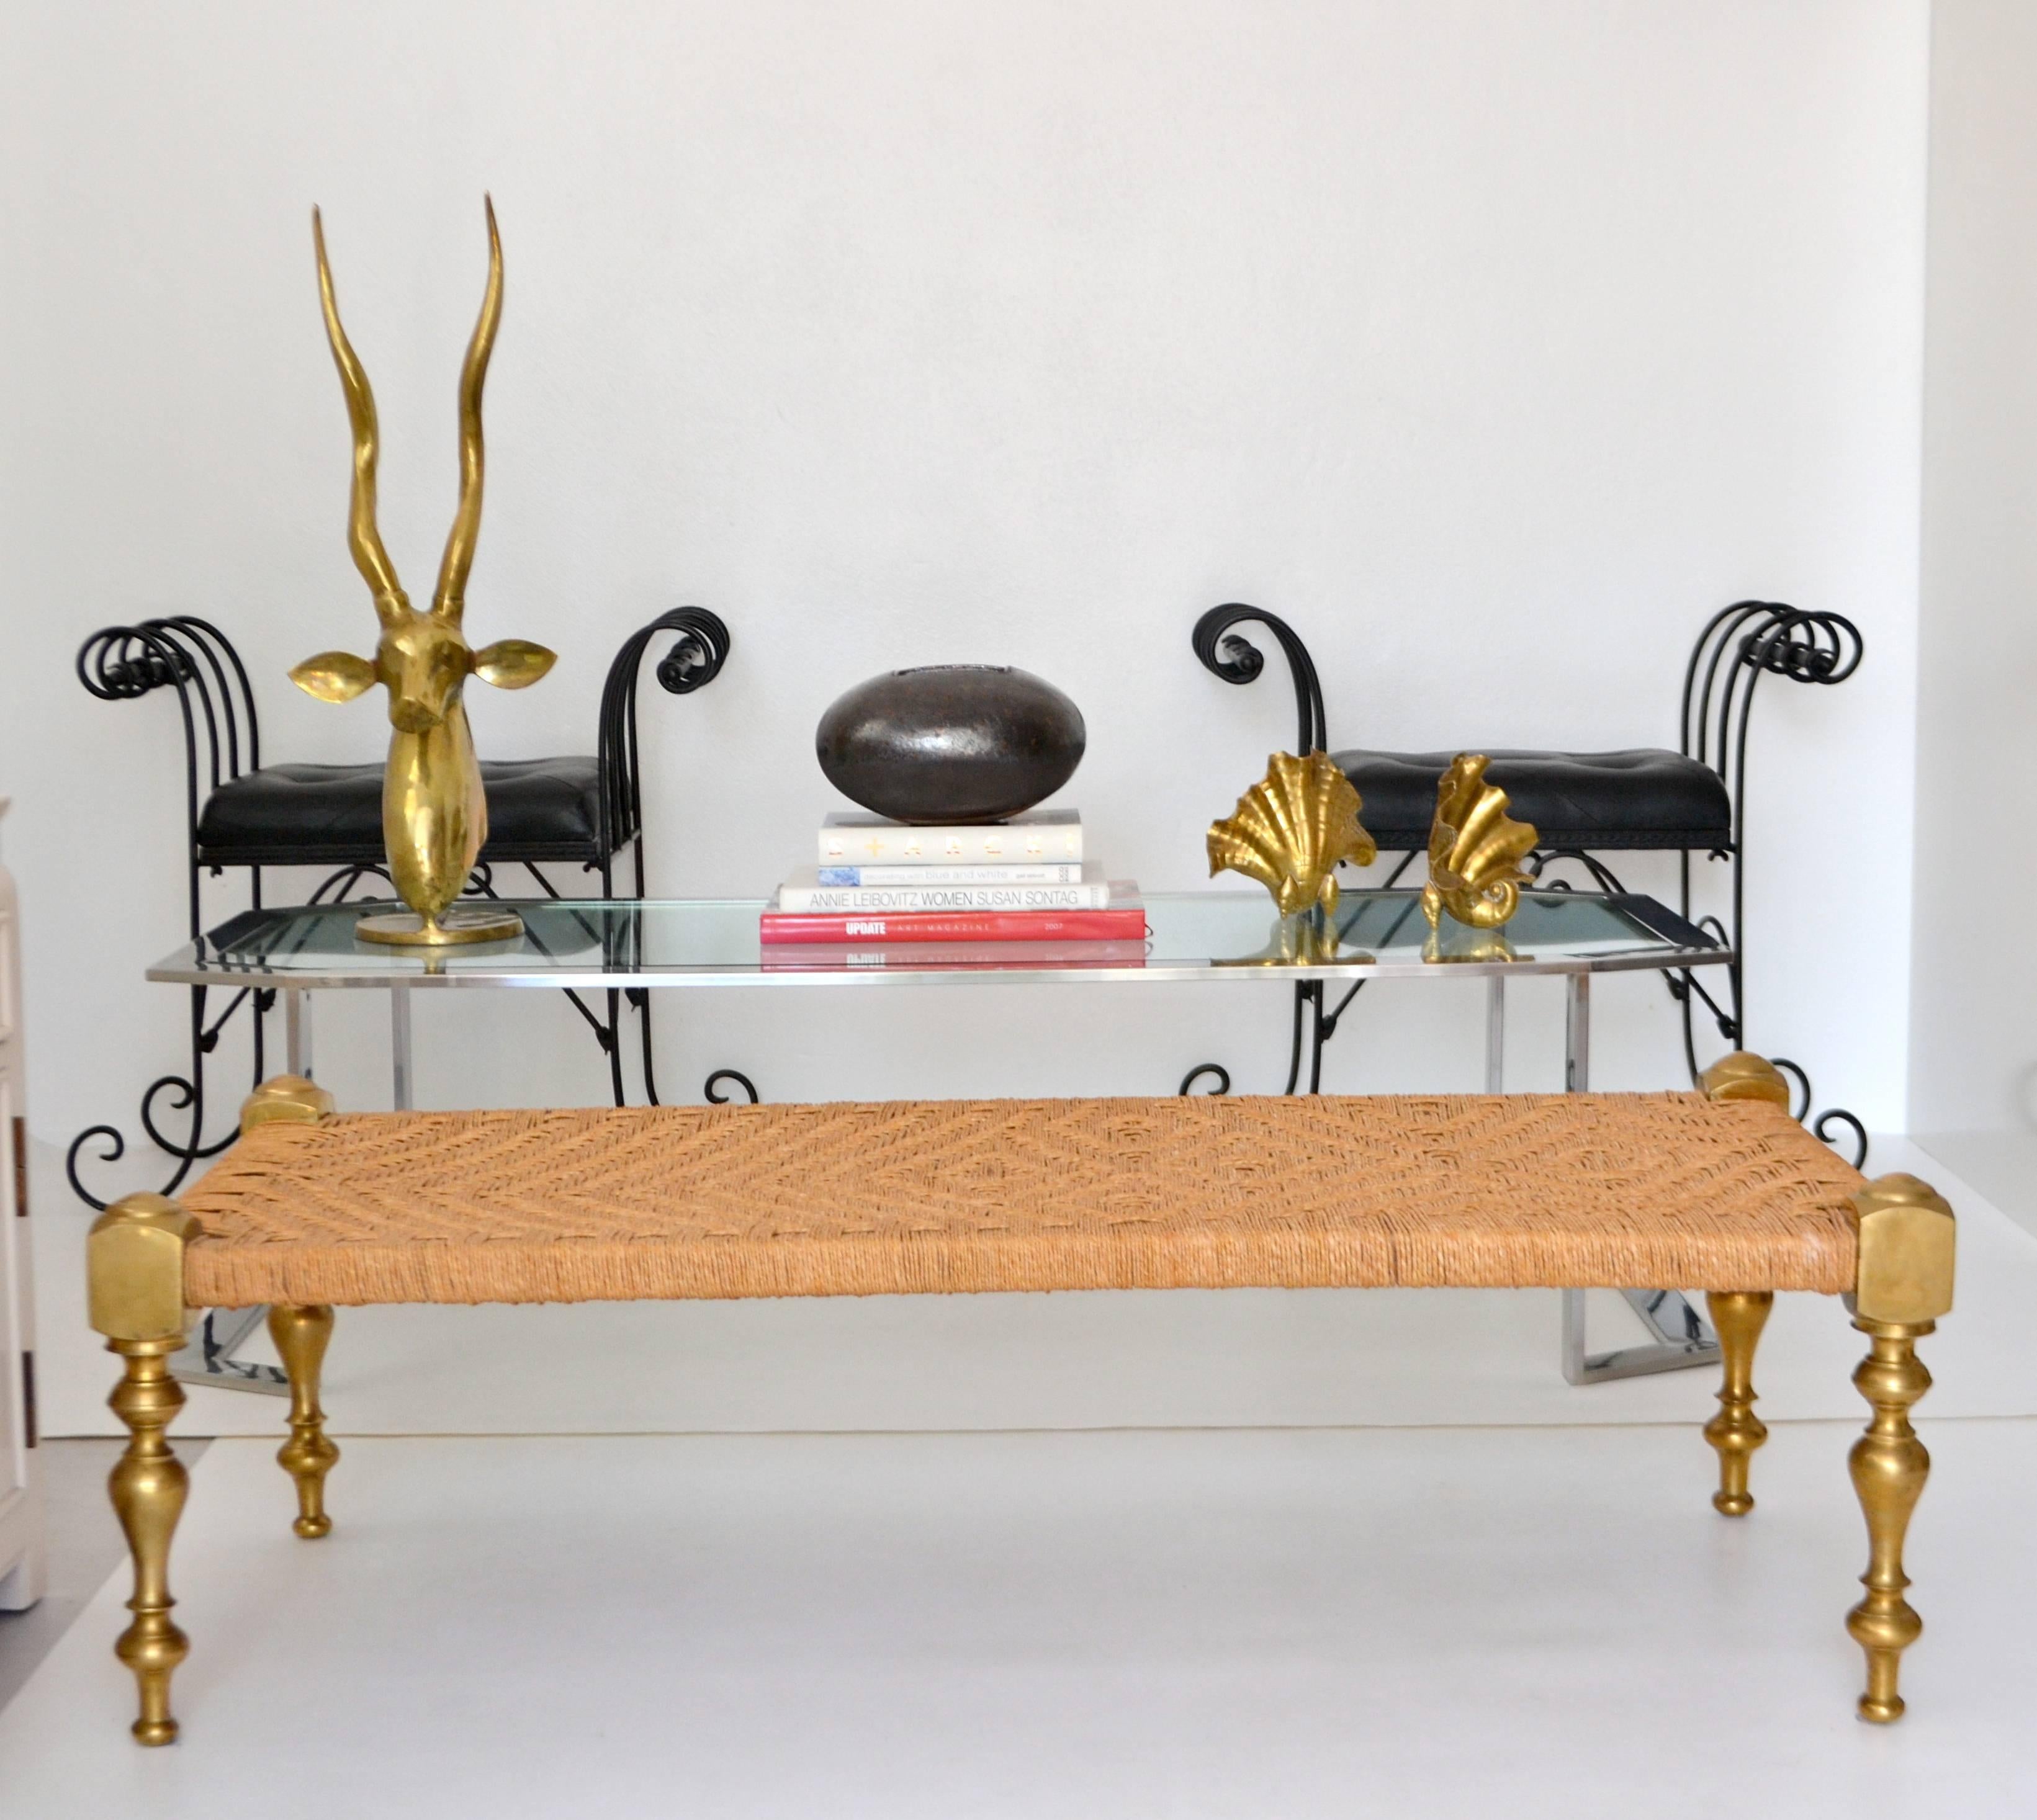 Striking Midcentury Anglo-Indian natural woven jute bench or stool on turned brass legs, circa 1960s-1970s. This artisan crafted bench could also be used versatility used as a coffee table or cocktail table.